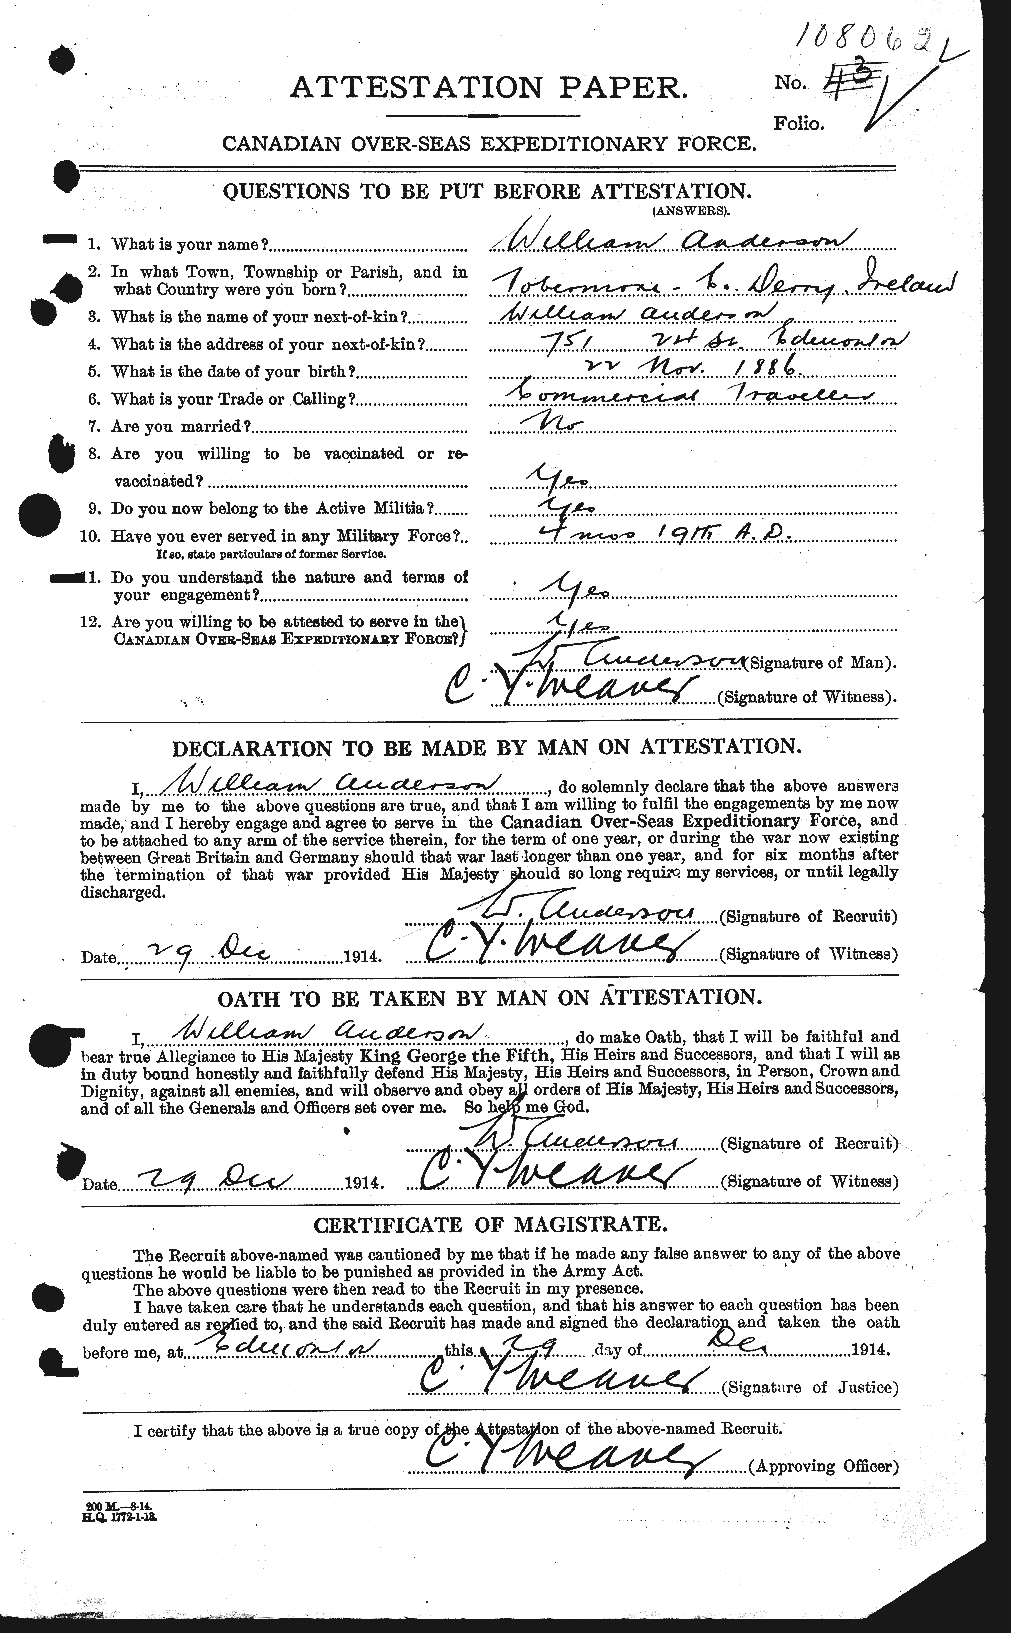 Personnel Records of the First World War - CEF 210765a